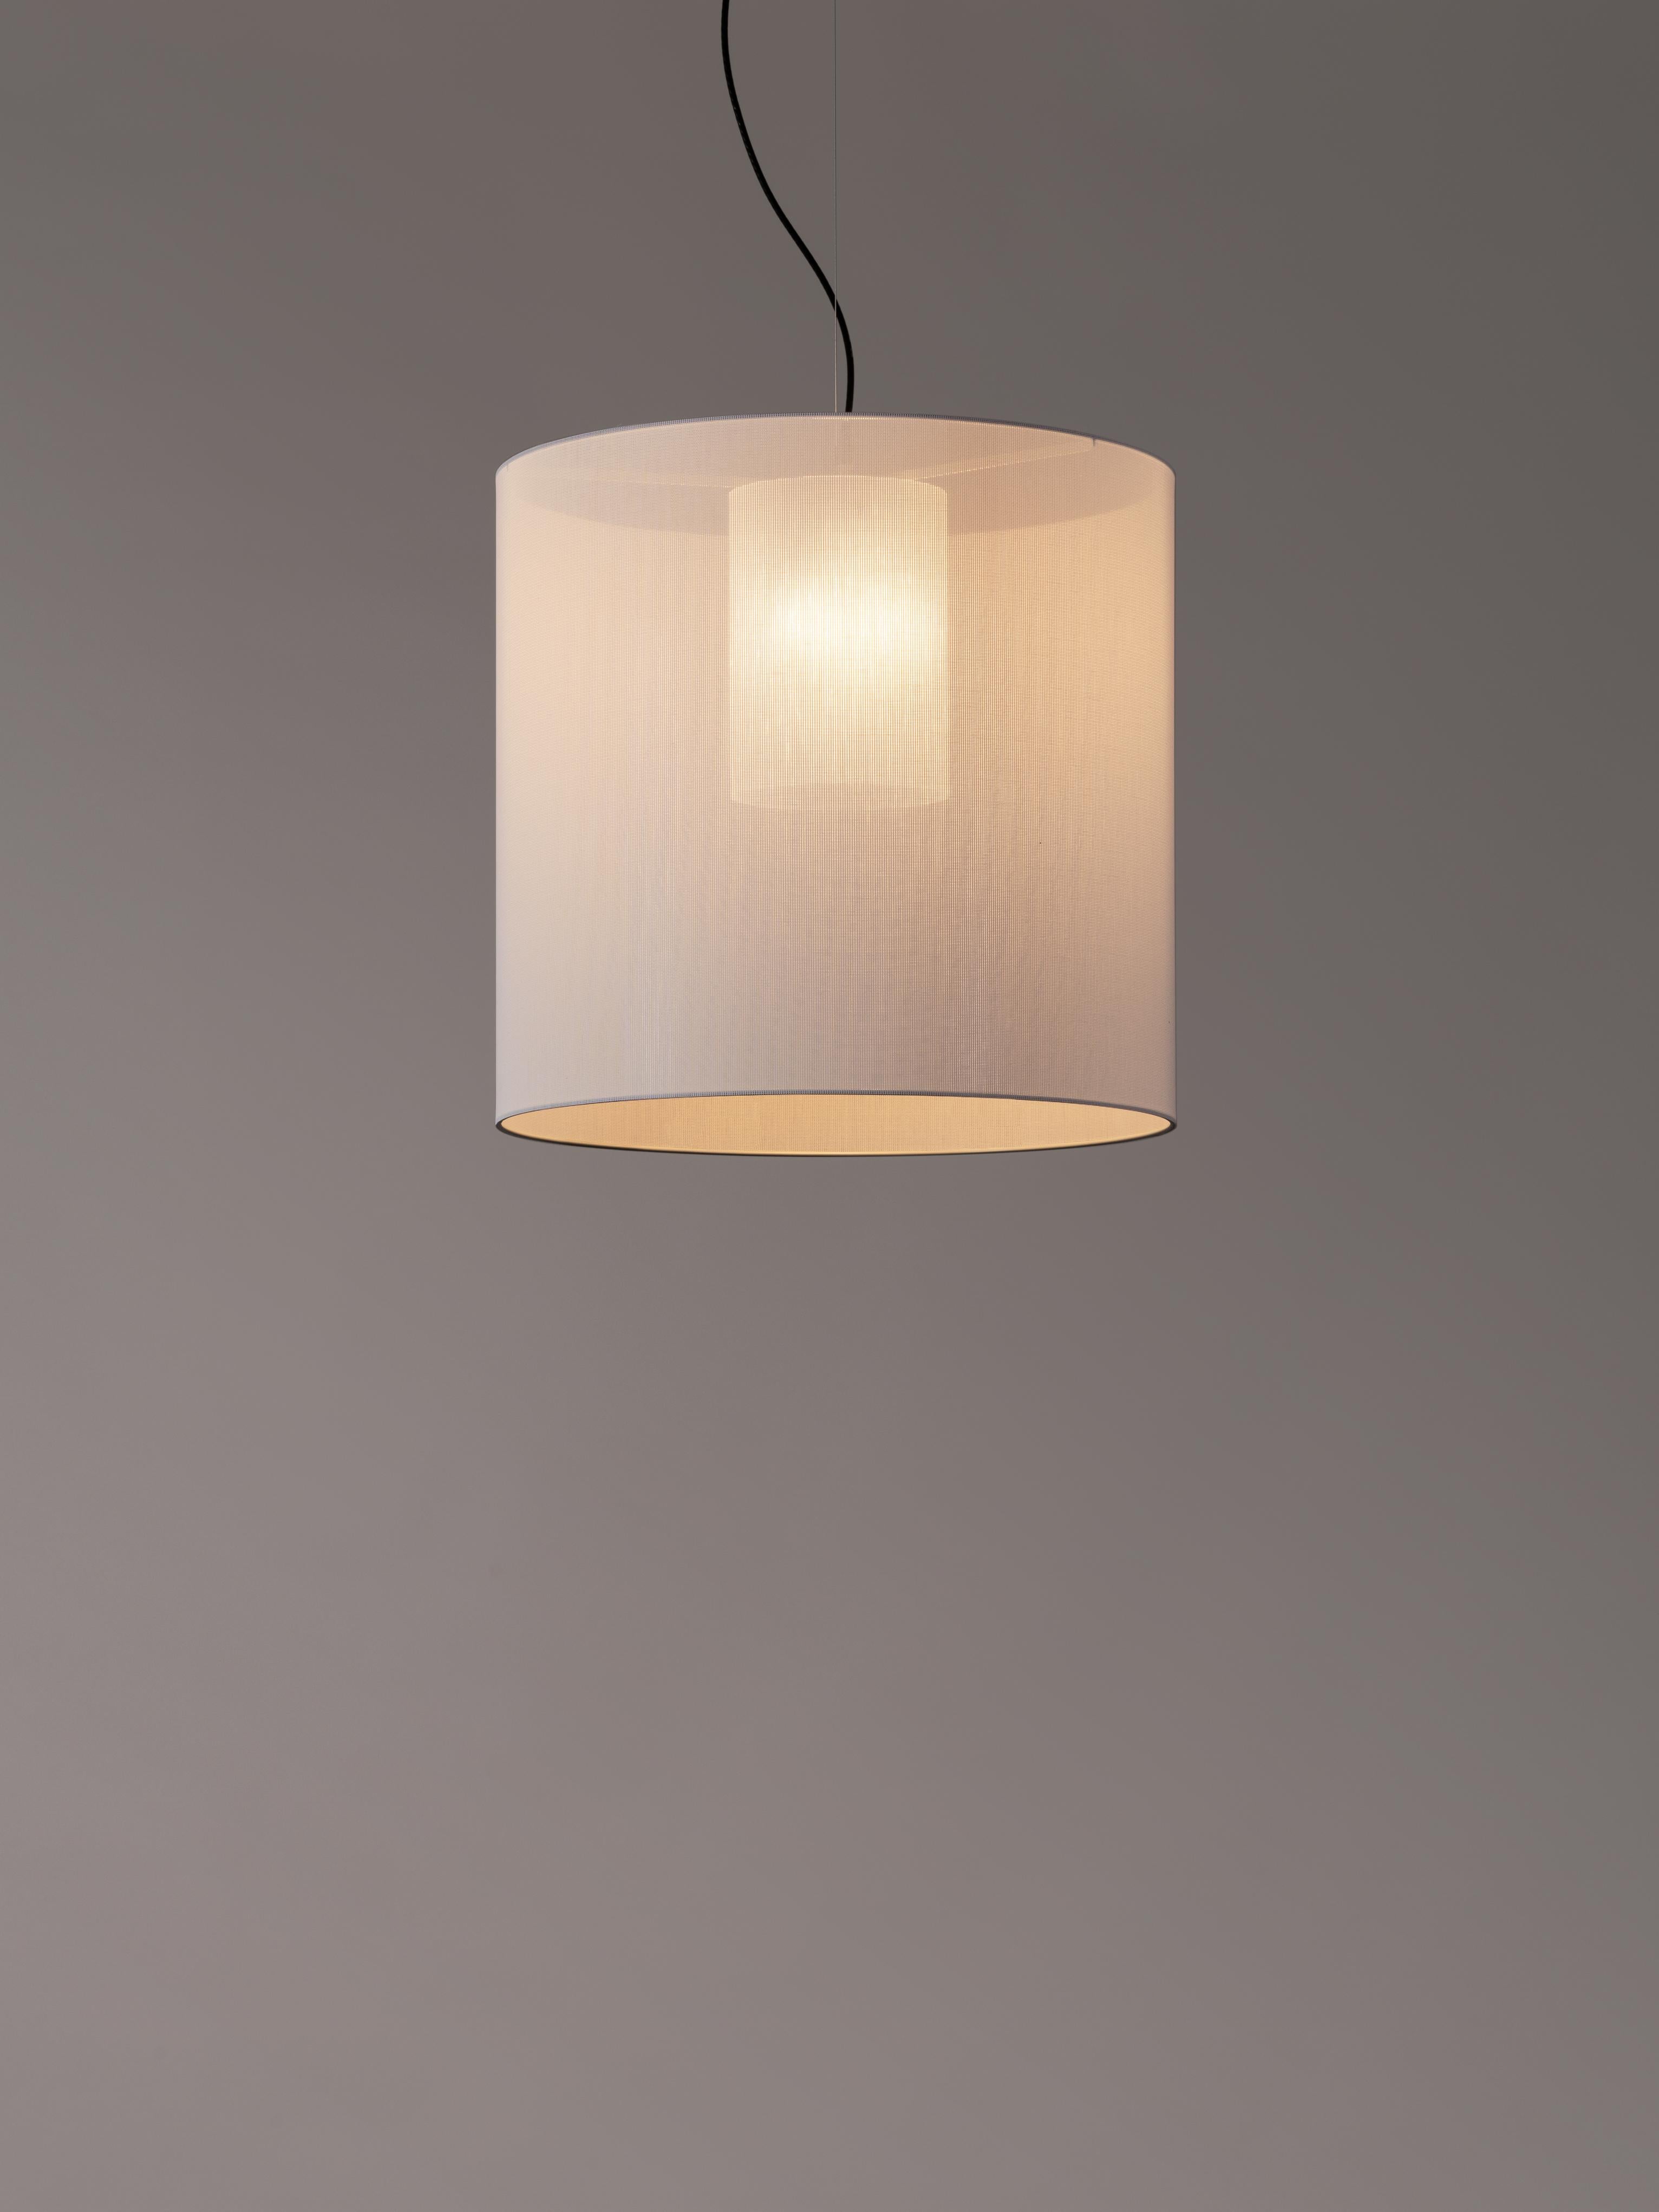 White Moaré L pendant lamp by Antoni Arola
Dimensions: D 62 x H 60 cm
Materials: Metal, polyester.
Available in other colors and sizes.

Moaré’s multiple combinations of formats and colours make it highly versatile. The series takes its name